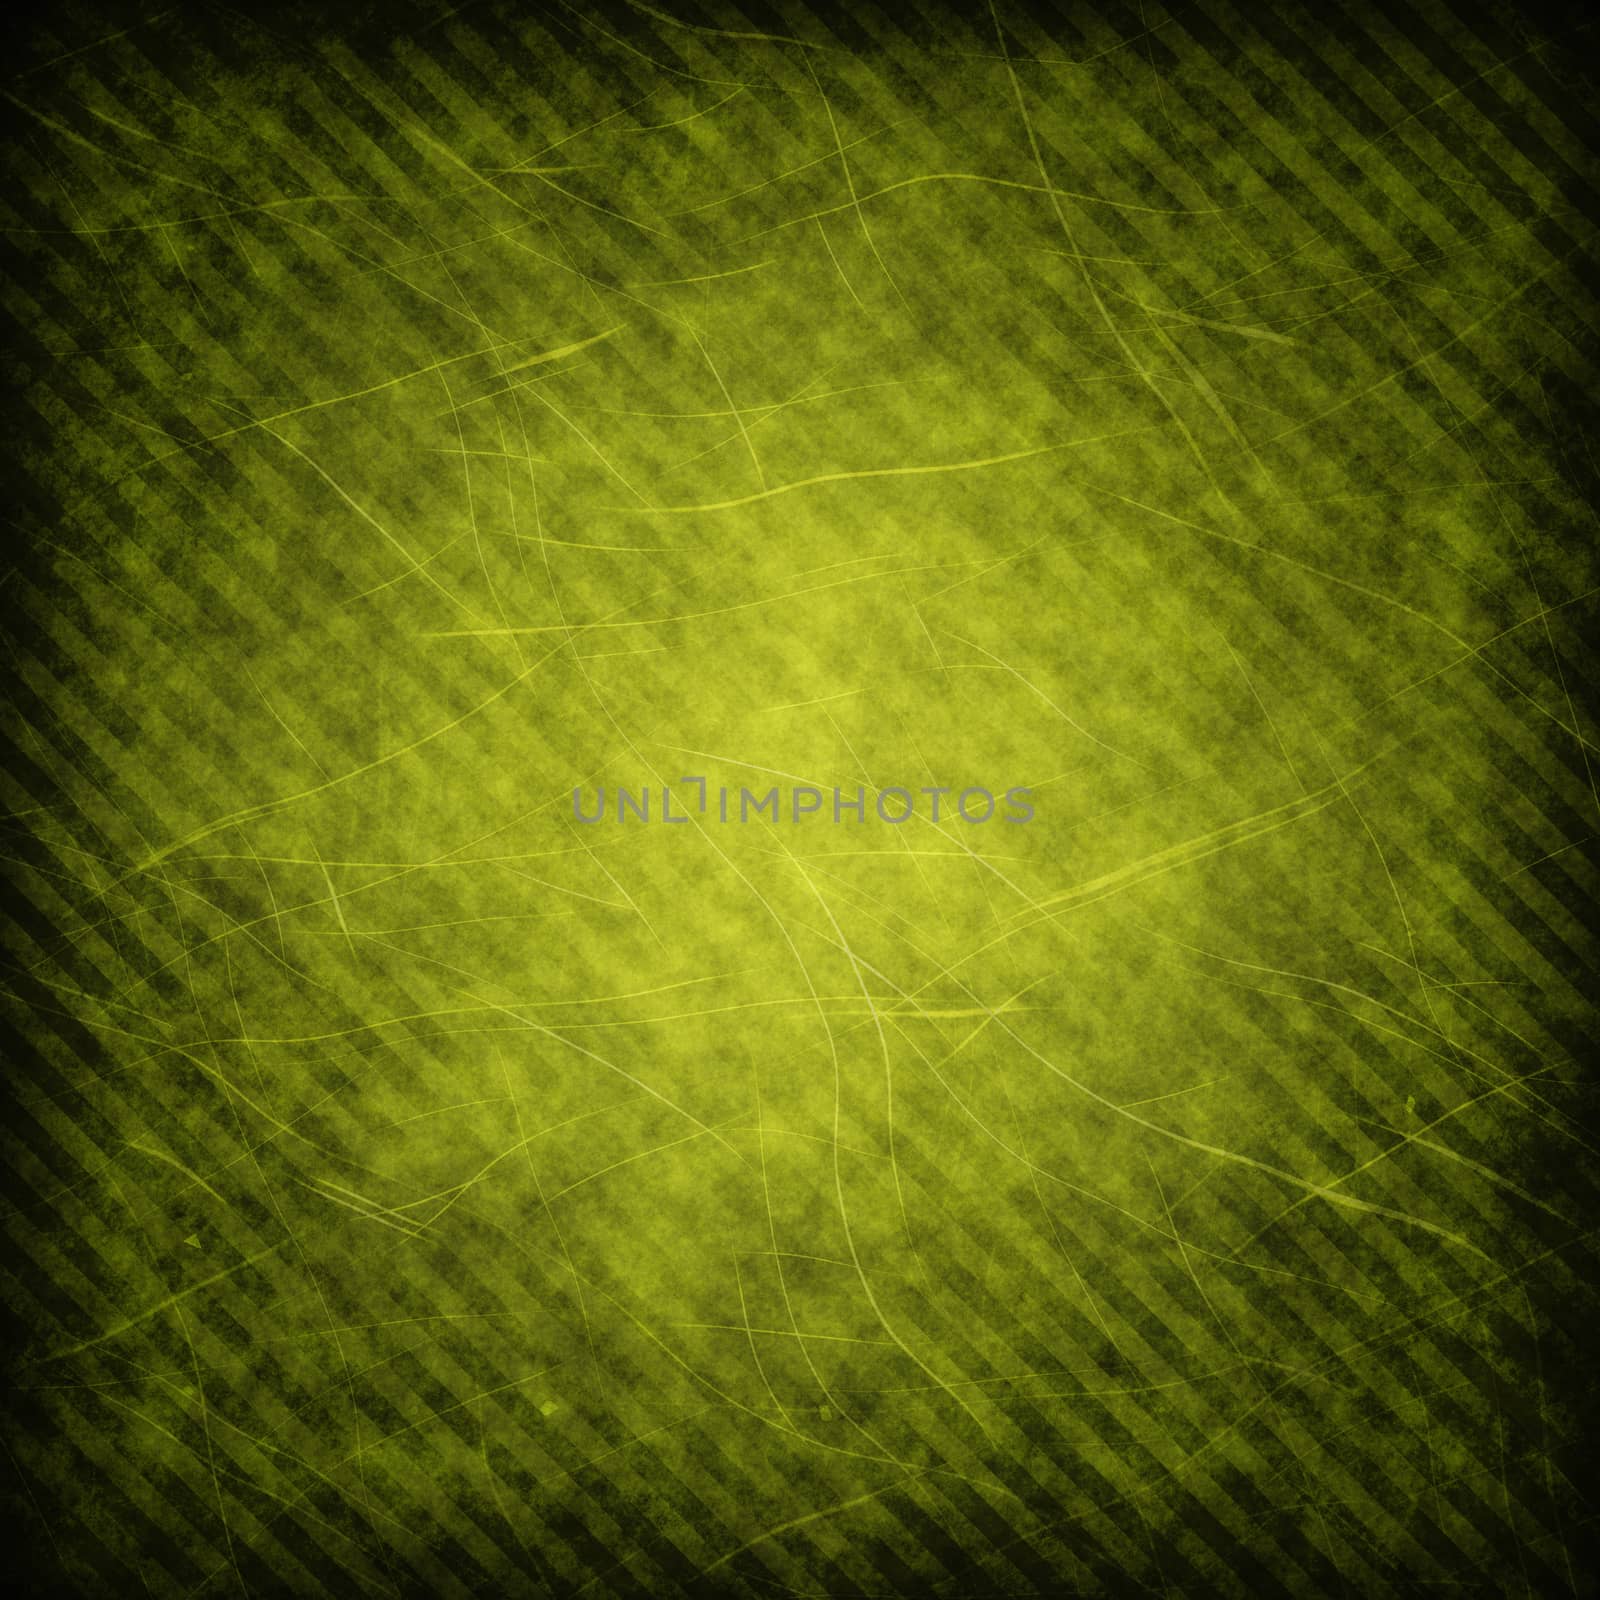 Green grunge striped background or texture